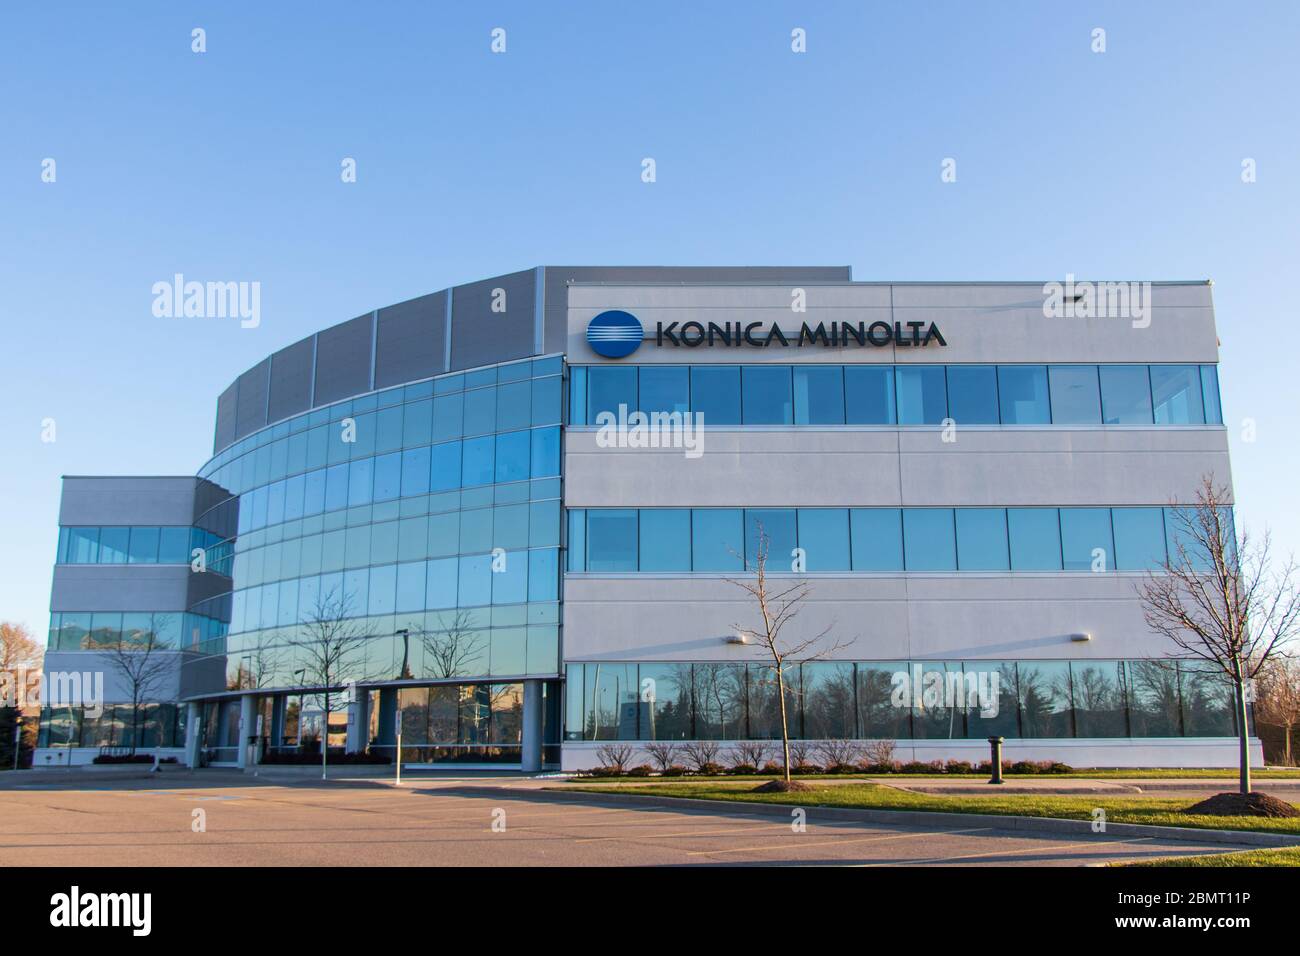 Konica Minolta, a Japanese multinational technology company office near Toronto with their logo seen atop of the building. Stock Photo